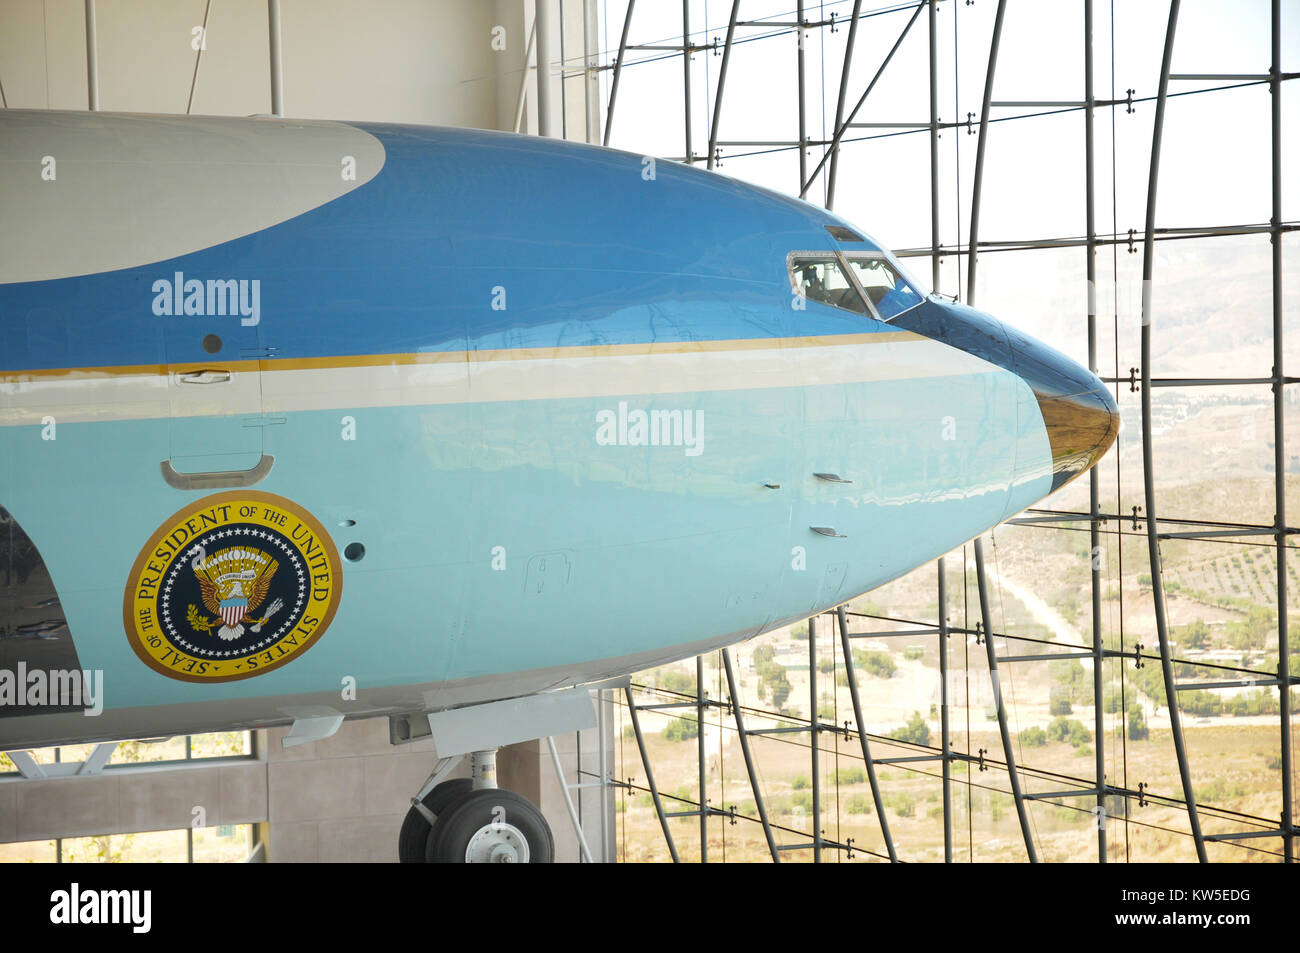 SIMI VALLEY, CA - July 24, 2010: Air Force One on display at the Reagan Presidential Library in Simi Valley. The aircraft are part of a continuing eve Stock Photo